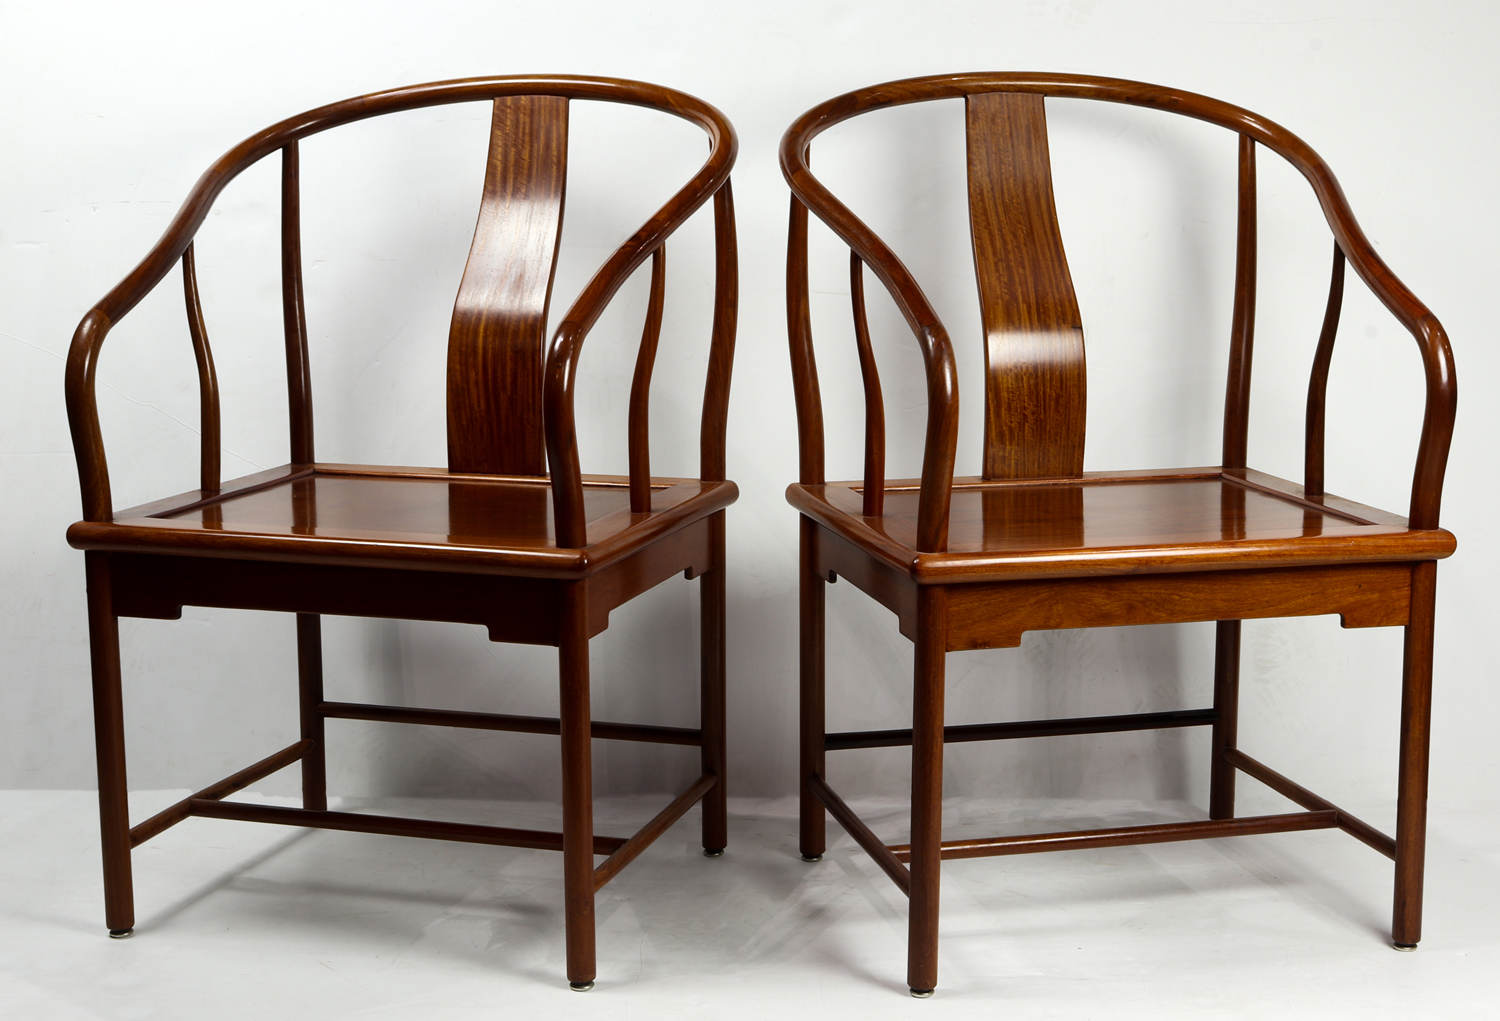  LOT OF 2 CHINESE HARDWOOD ARMCHAIRS 3a50b9